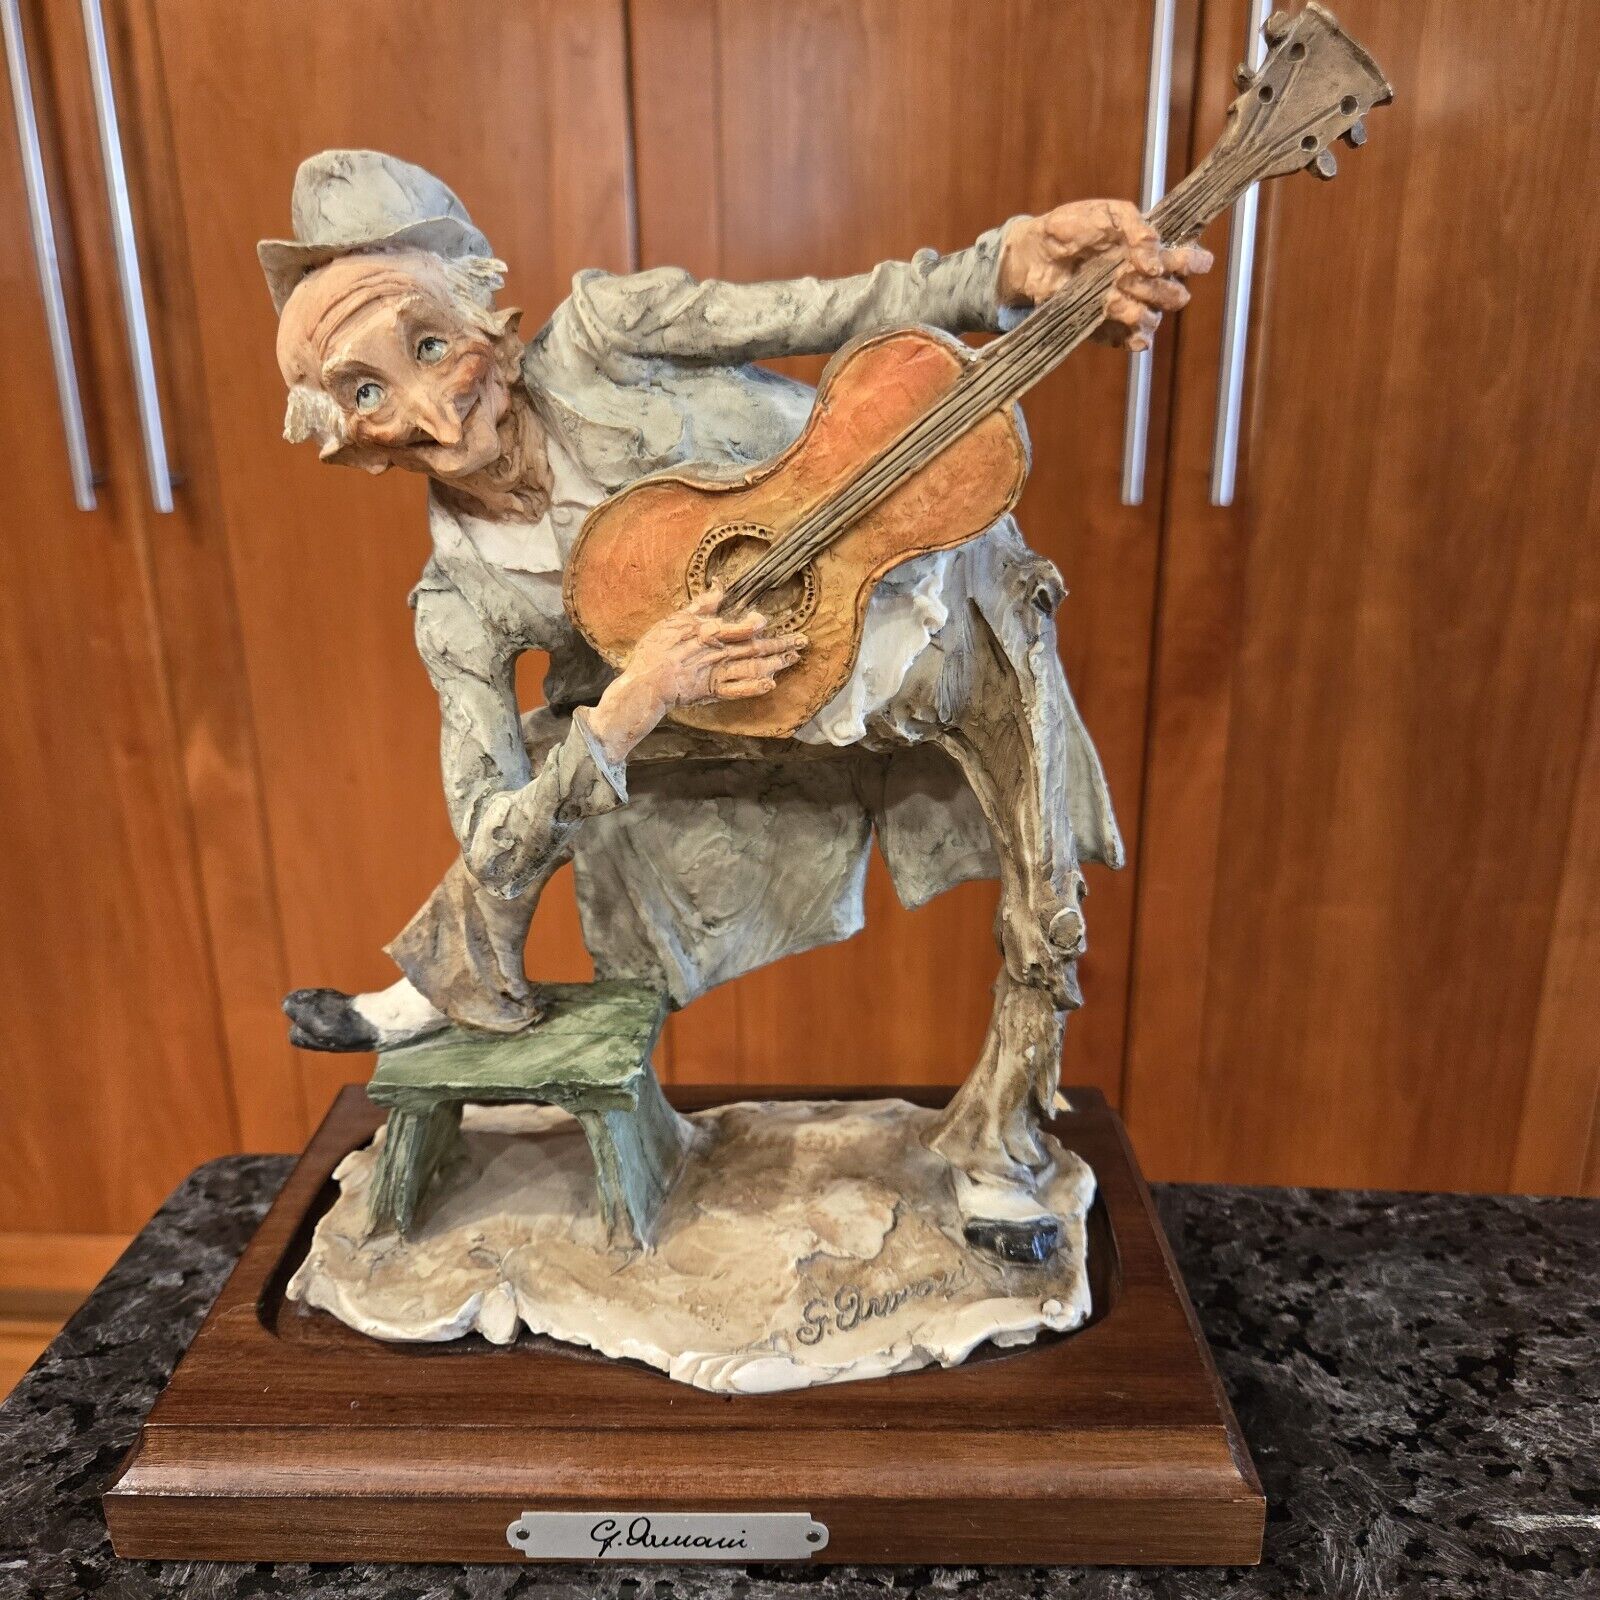 Vtg Capodimonte Porcelain Guitar Player Figurine Statue Sculpture Made in Italy